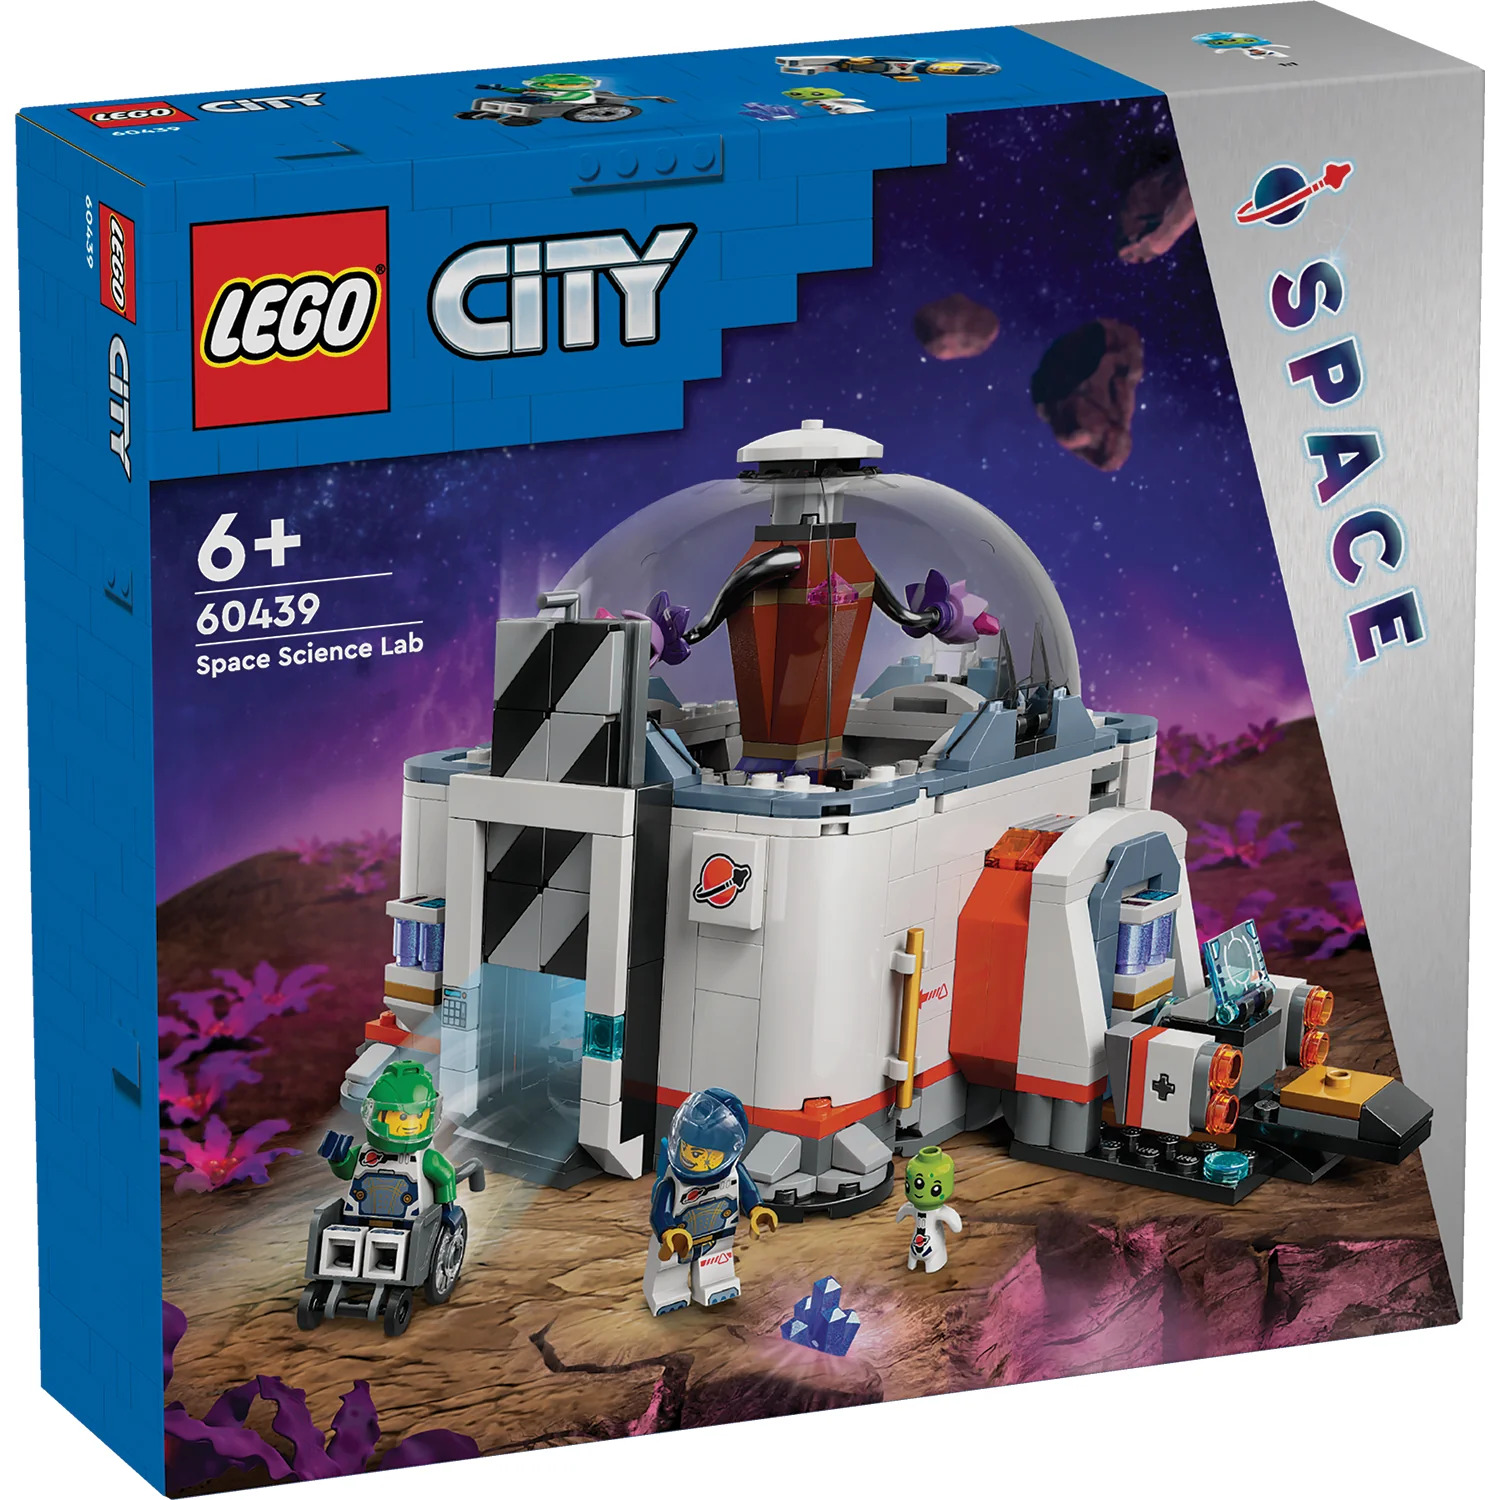 The LEGO City Space Science Laboratory (60439) has been revealed.